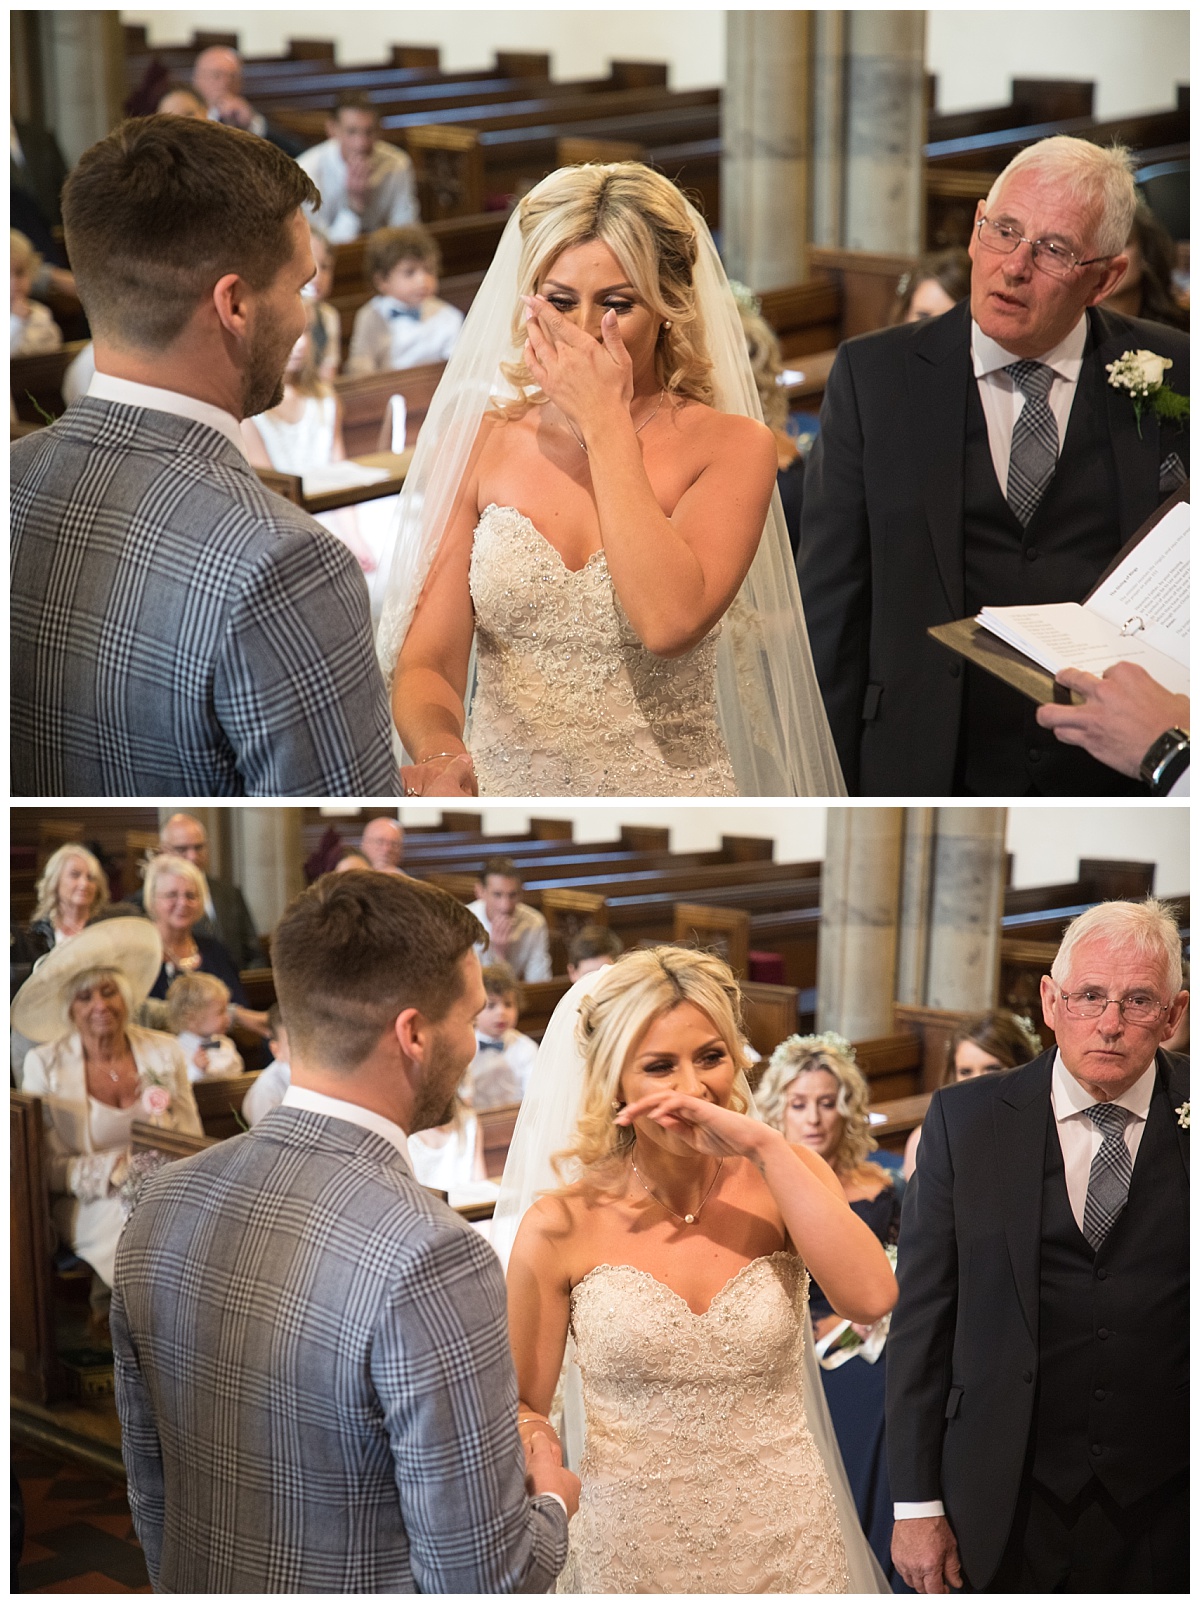 Wedding Photography Manchester - Brittany and Lee's Owen House Farm Wedding 34